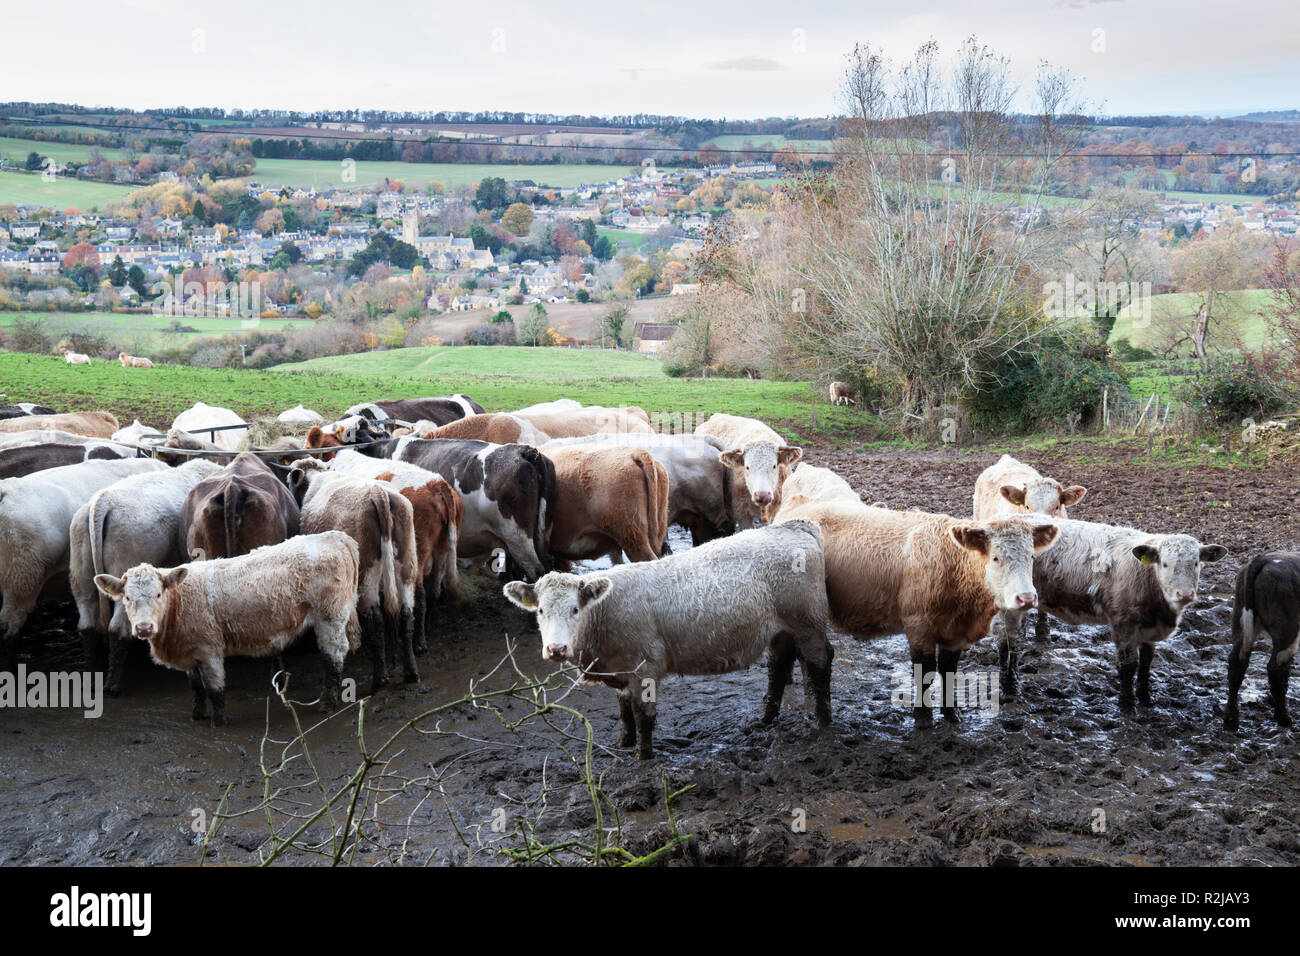 Cows standing in mud above village of Blockley taken from public footpath, Blockley, Cotswolds, Gloucestershire, England, United Kingdom, Europe Stock Photo